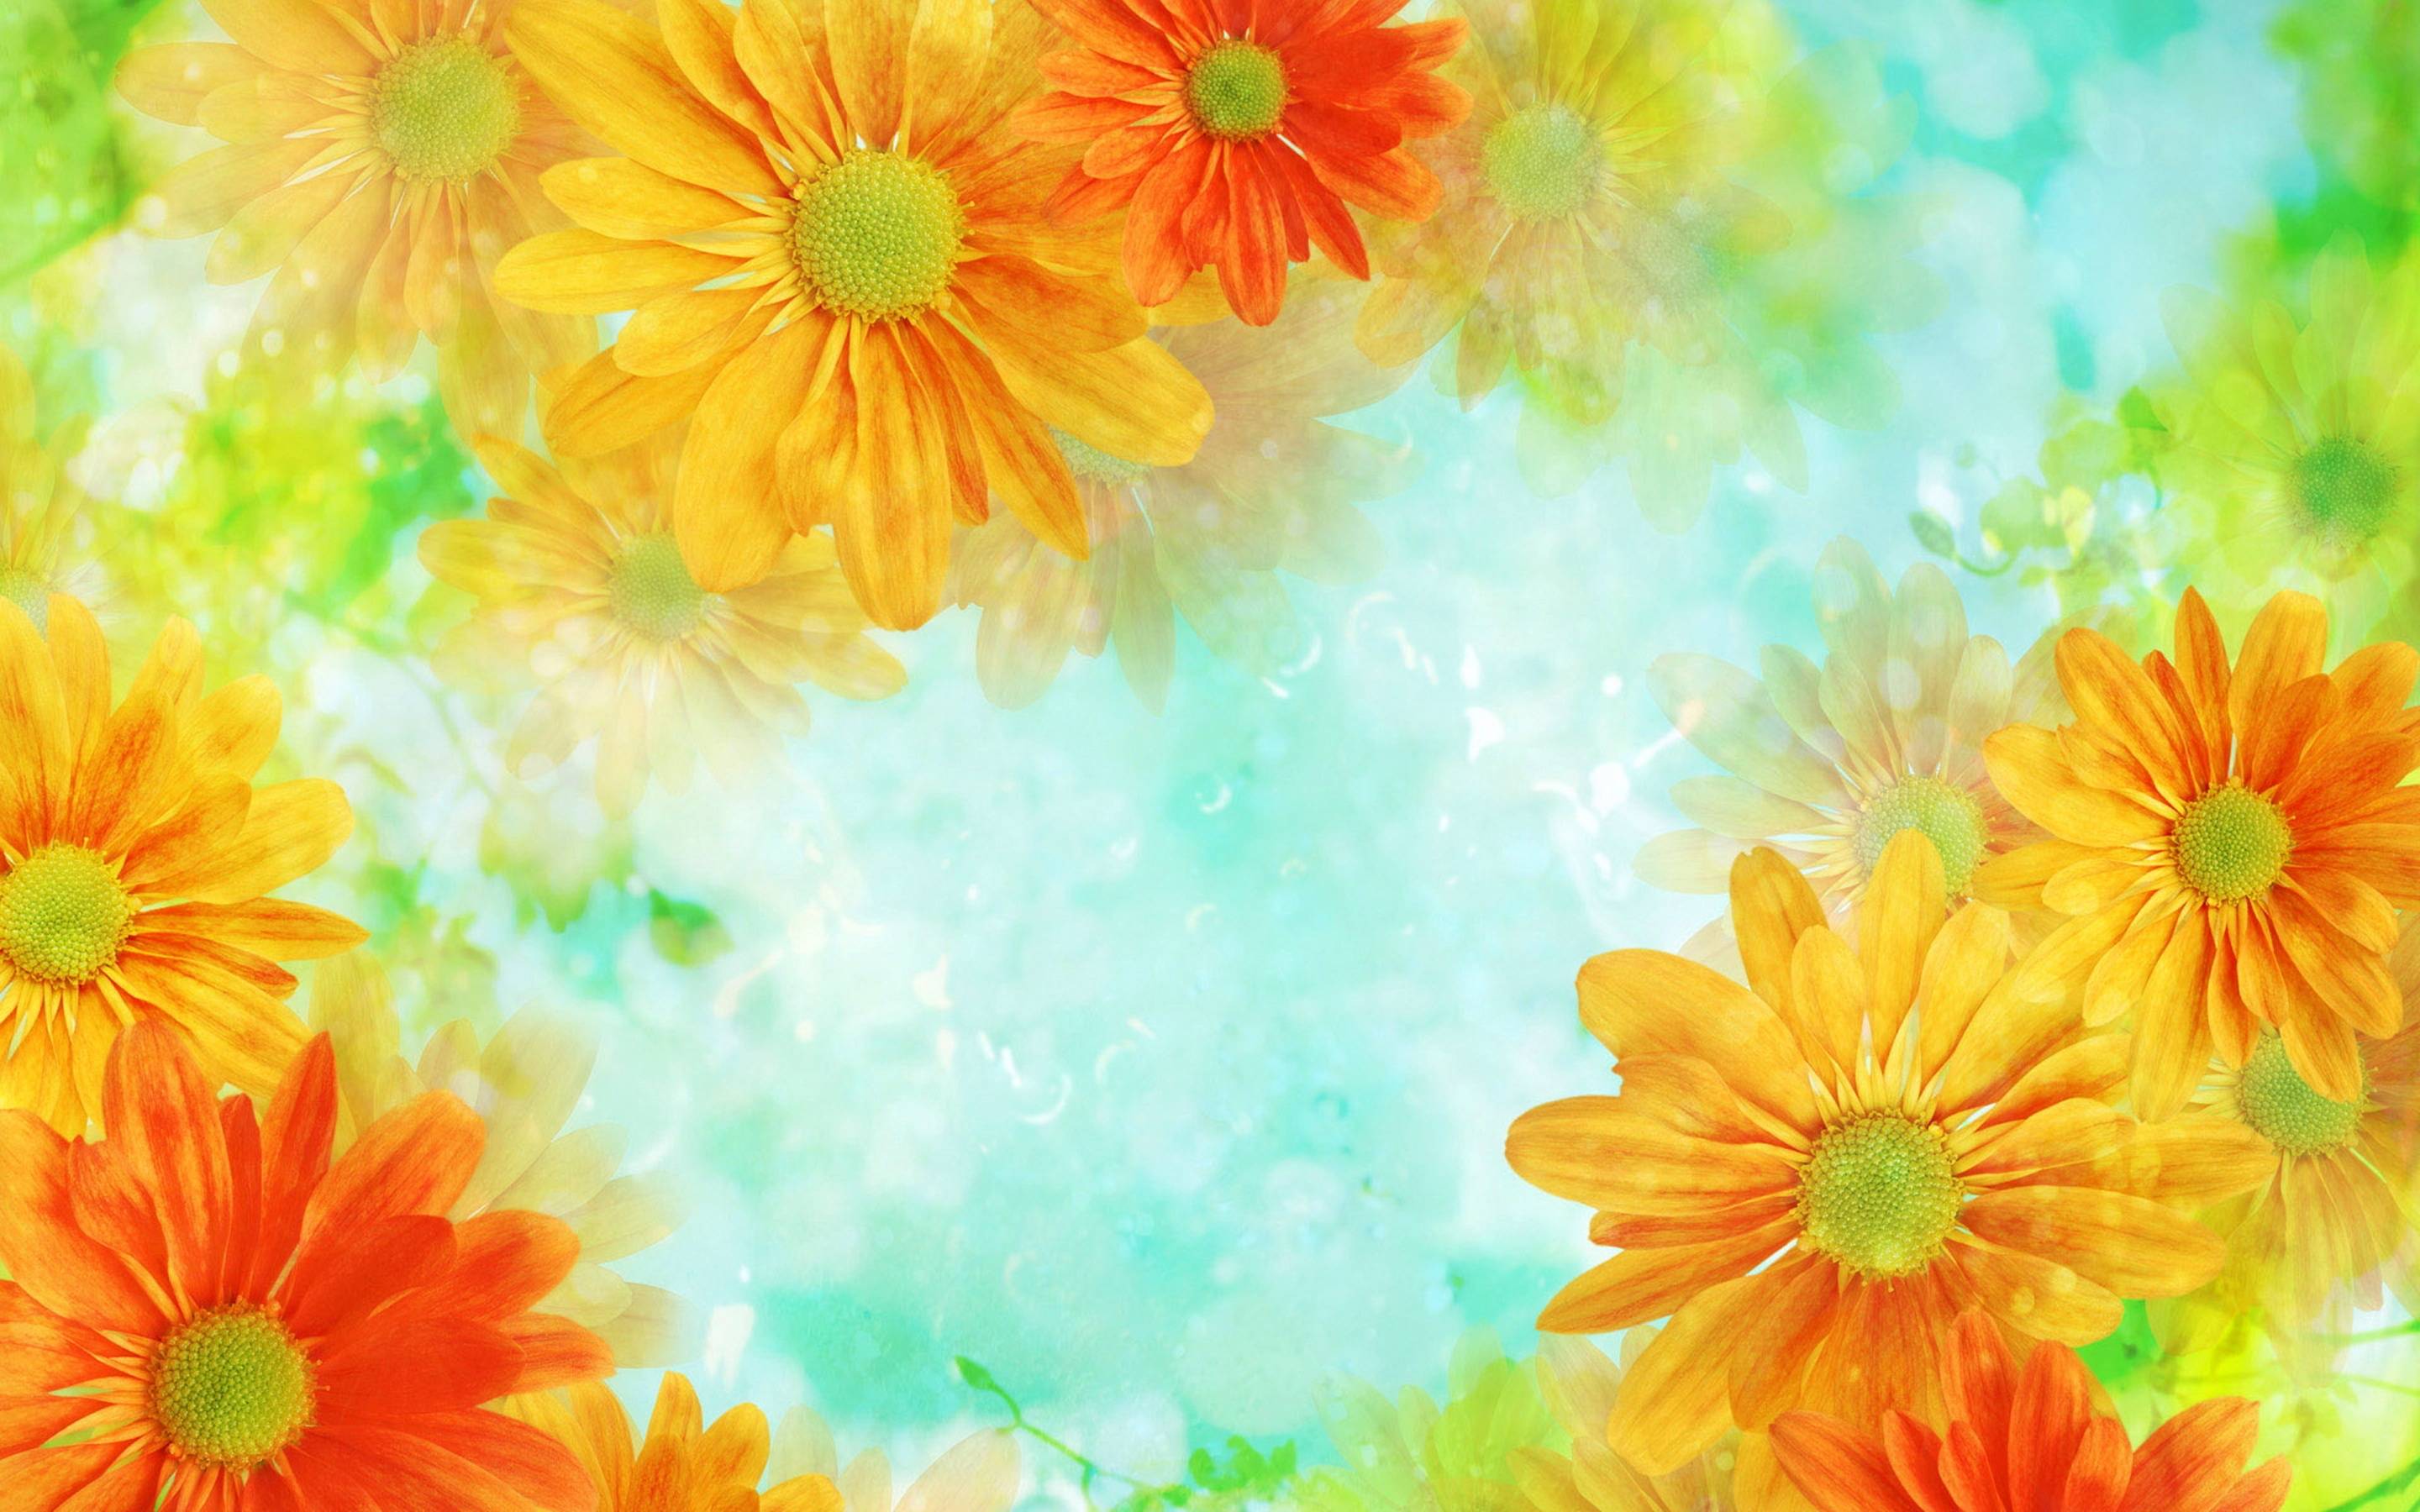 Wallpaper For > Background Image With Flowers